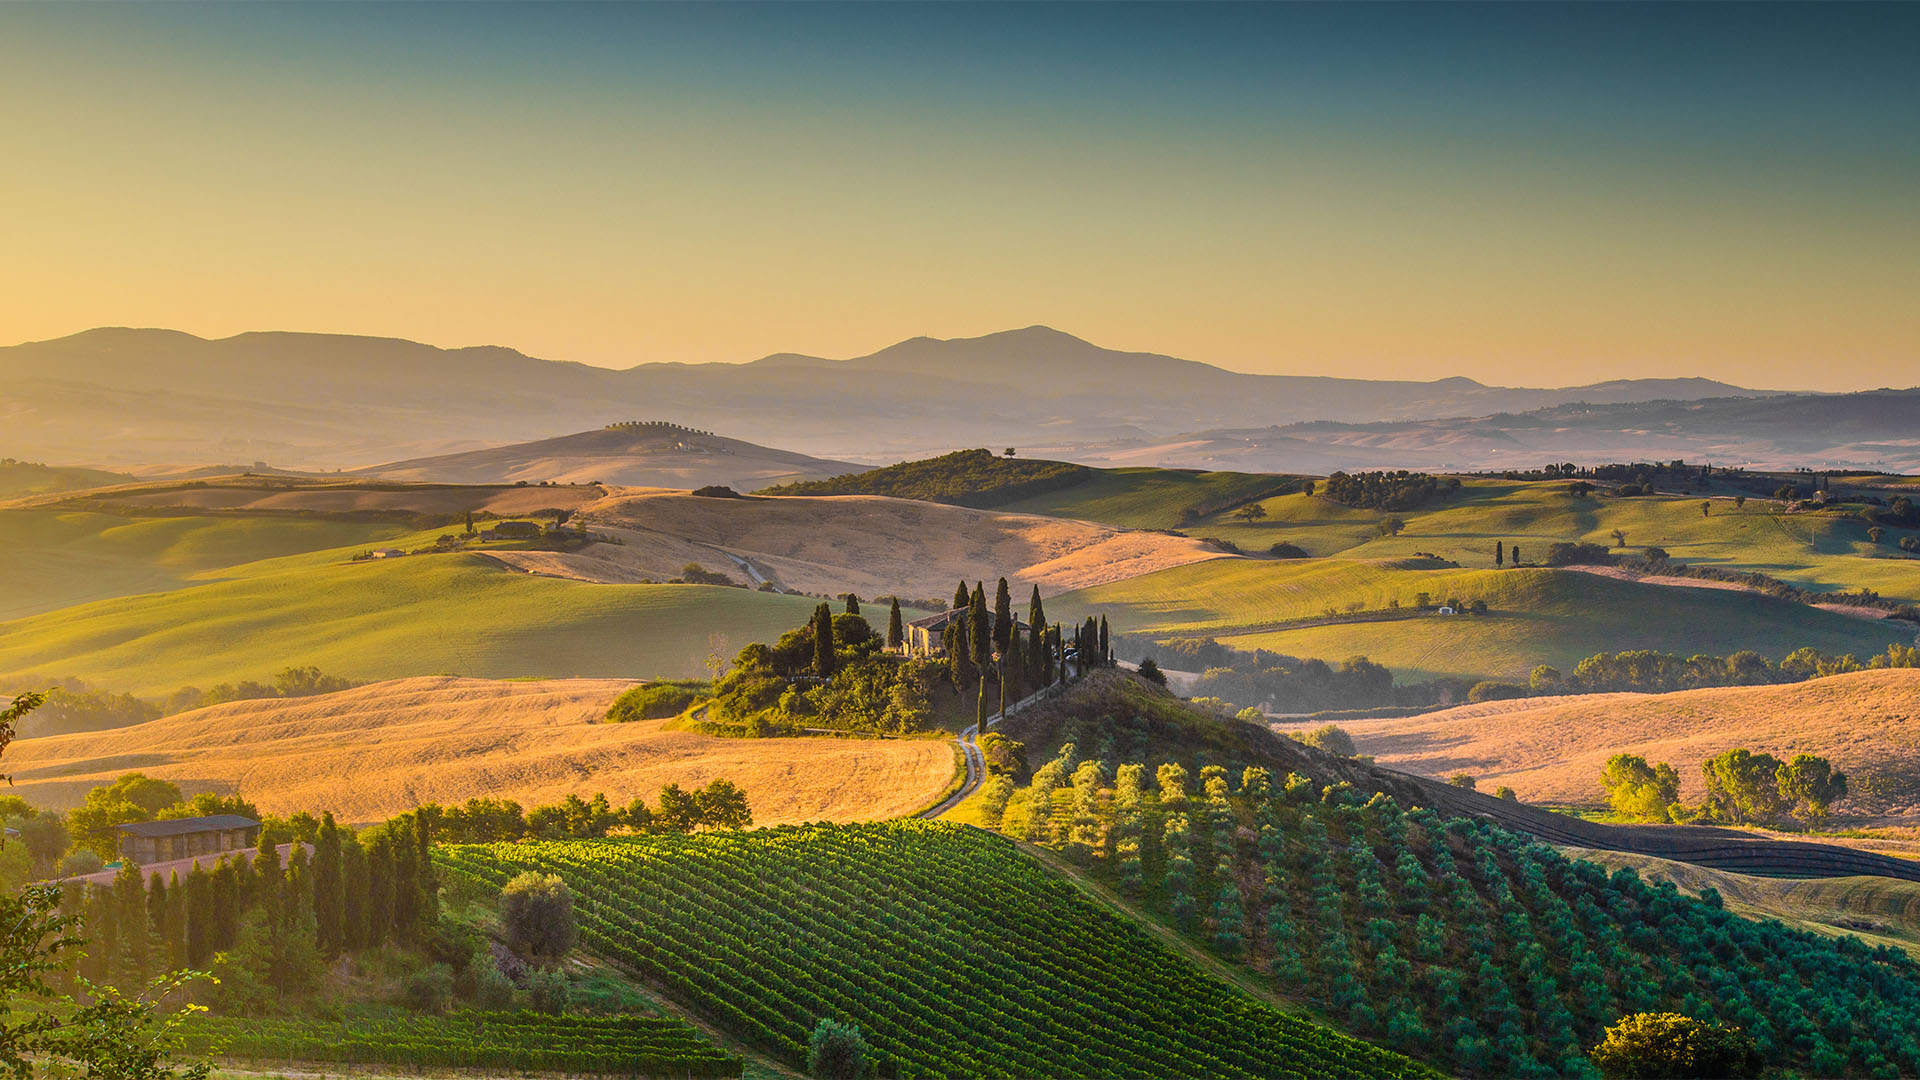 A photo of the Tuscan and Umbrian countryside taken at sunrise